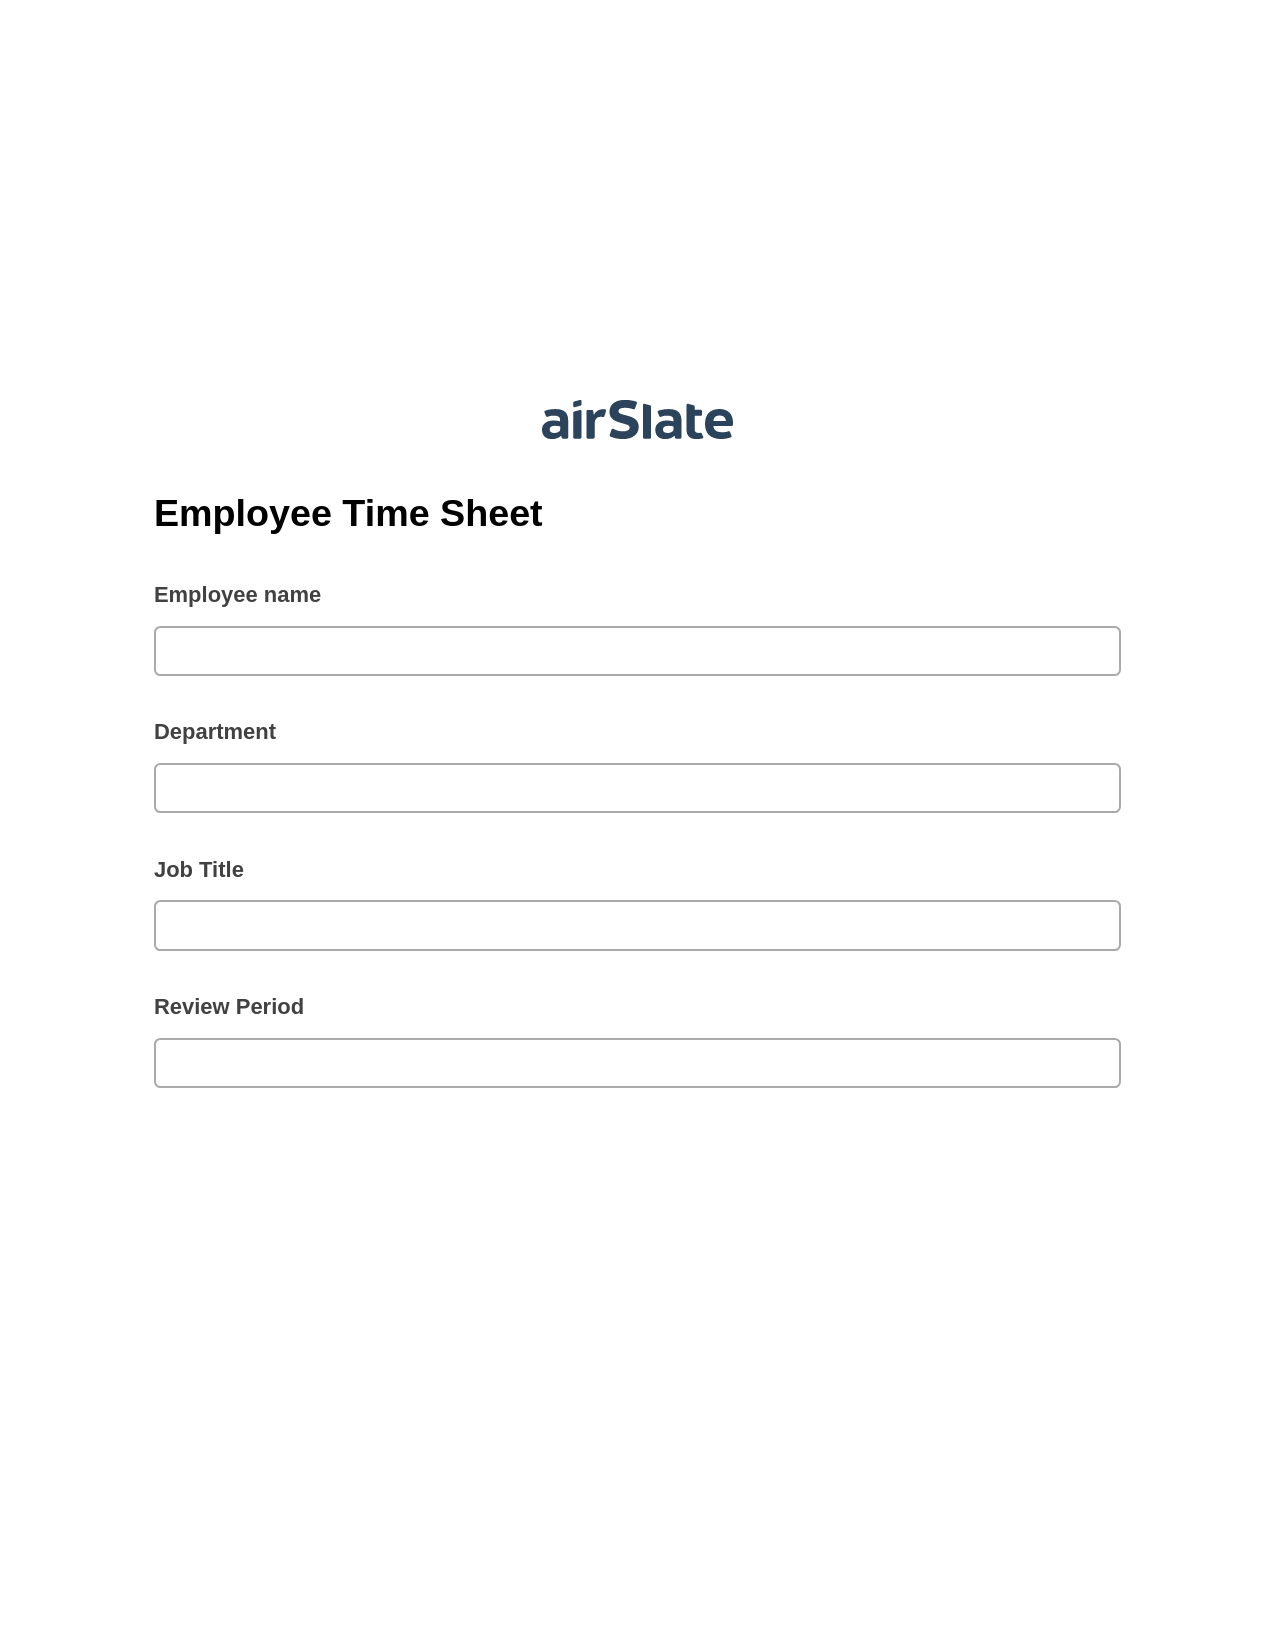 Employee Time Sheet Pre-fill Dropdowns from CSV file Bot, Update Audit Trail Bot, Post-finish Document Bot